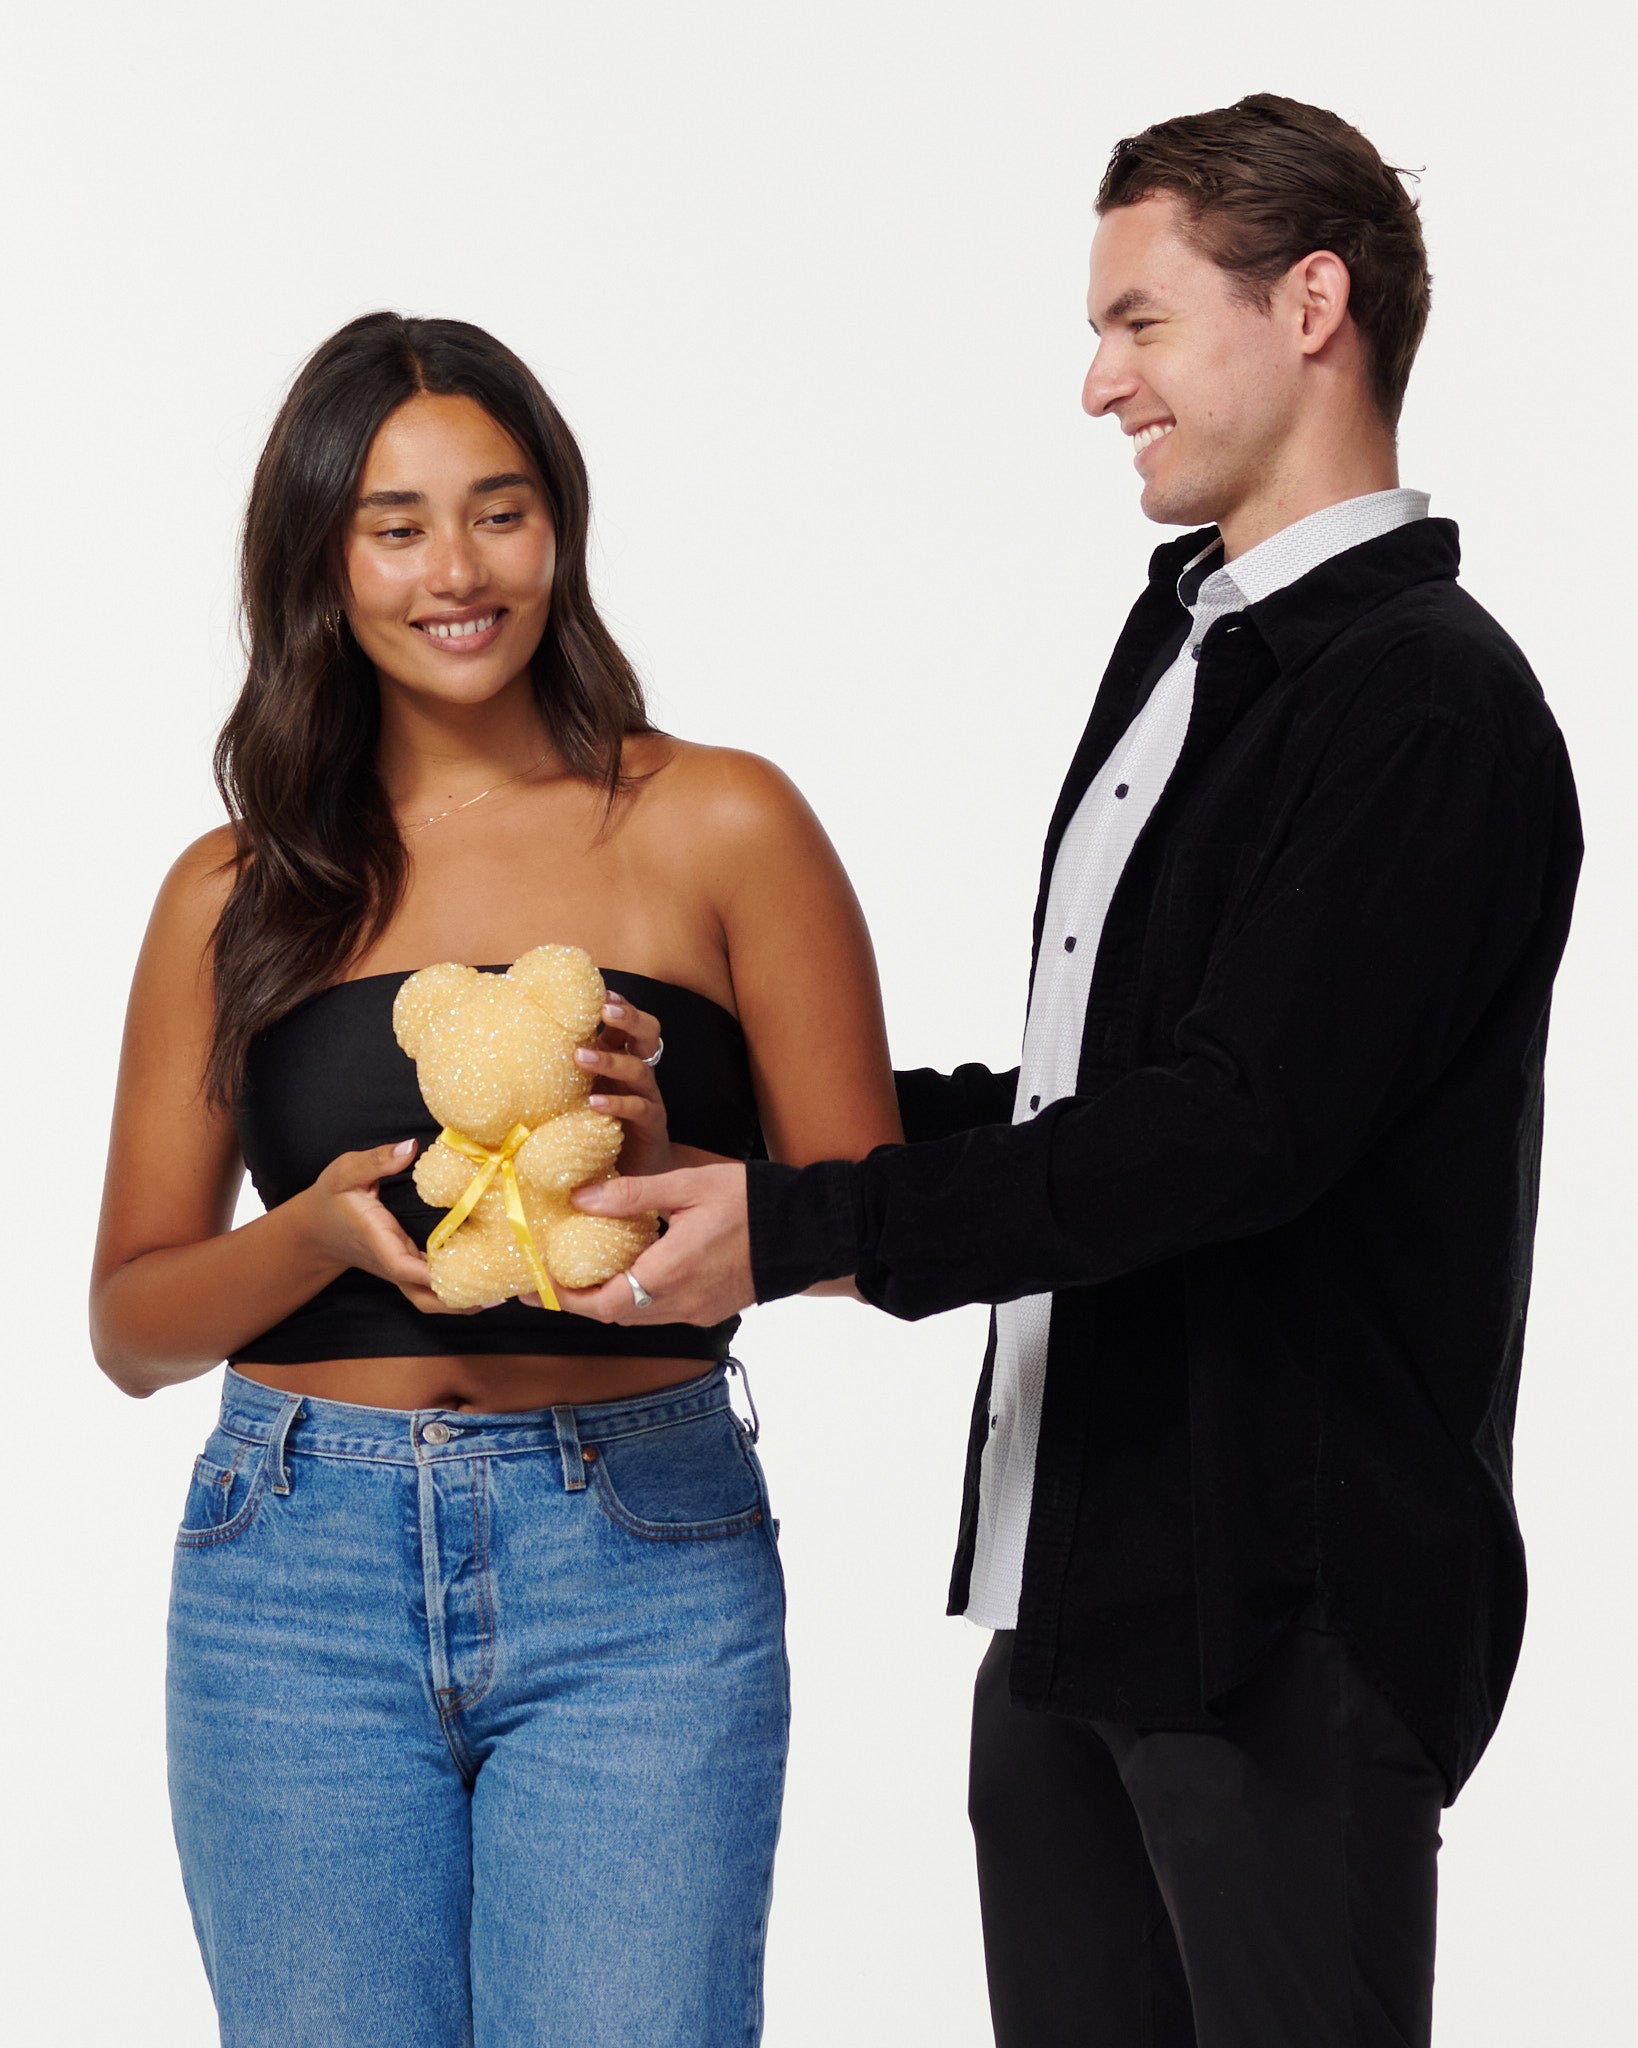 A woman and man share a moment, with the woman holding a gold-glitter bear and the man in a black jacket smiling at her. They both wear casual clothing and exude a friendly, happy demeanor.